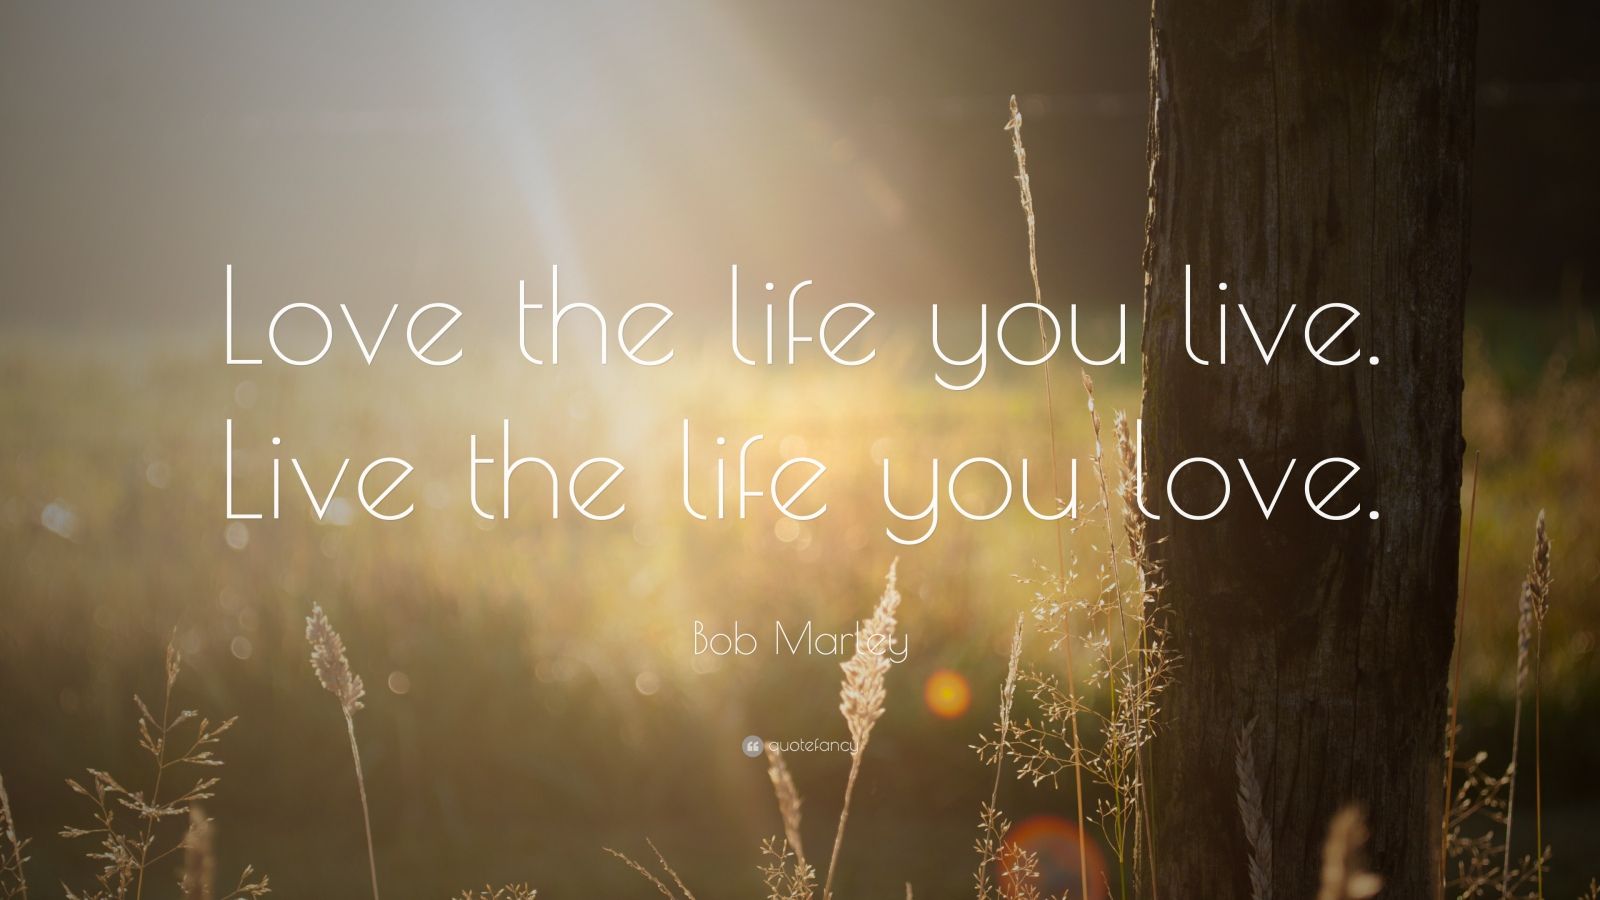 love the life you live quotes love the life you live bob marley wallpaper hd wallskid